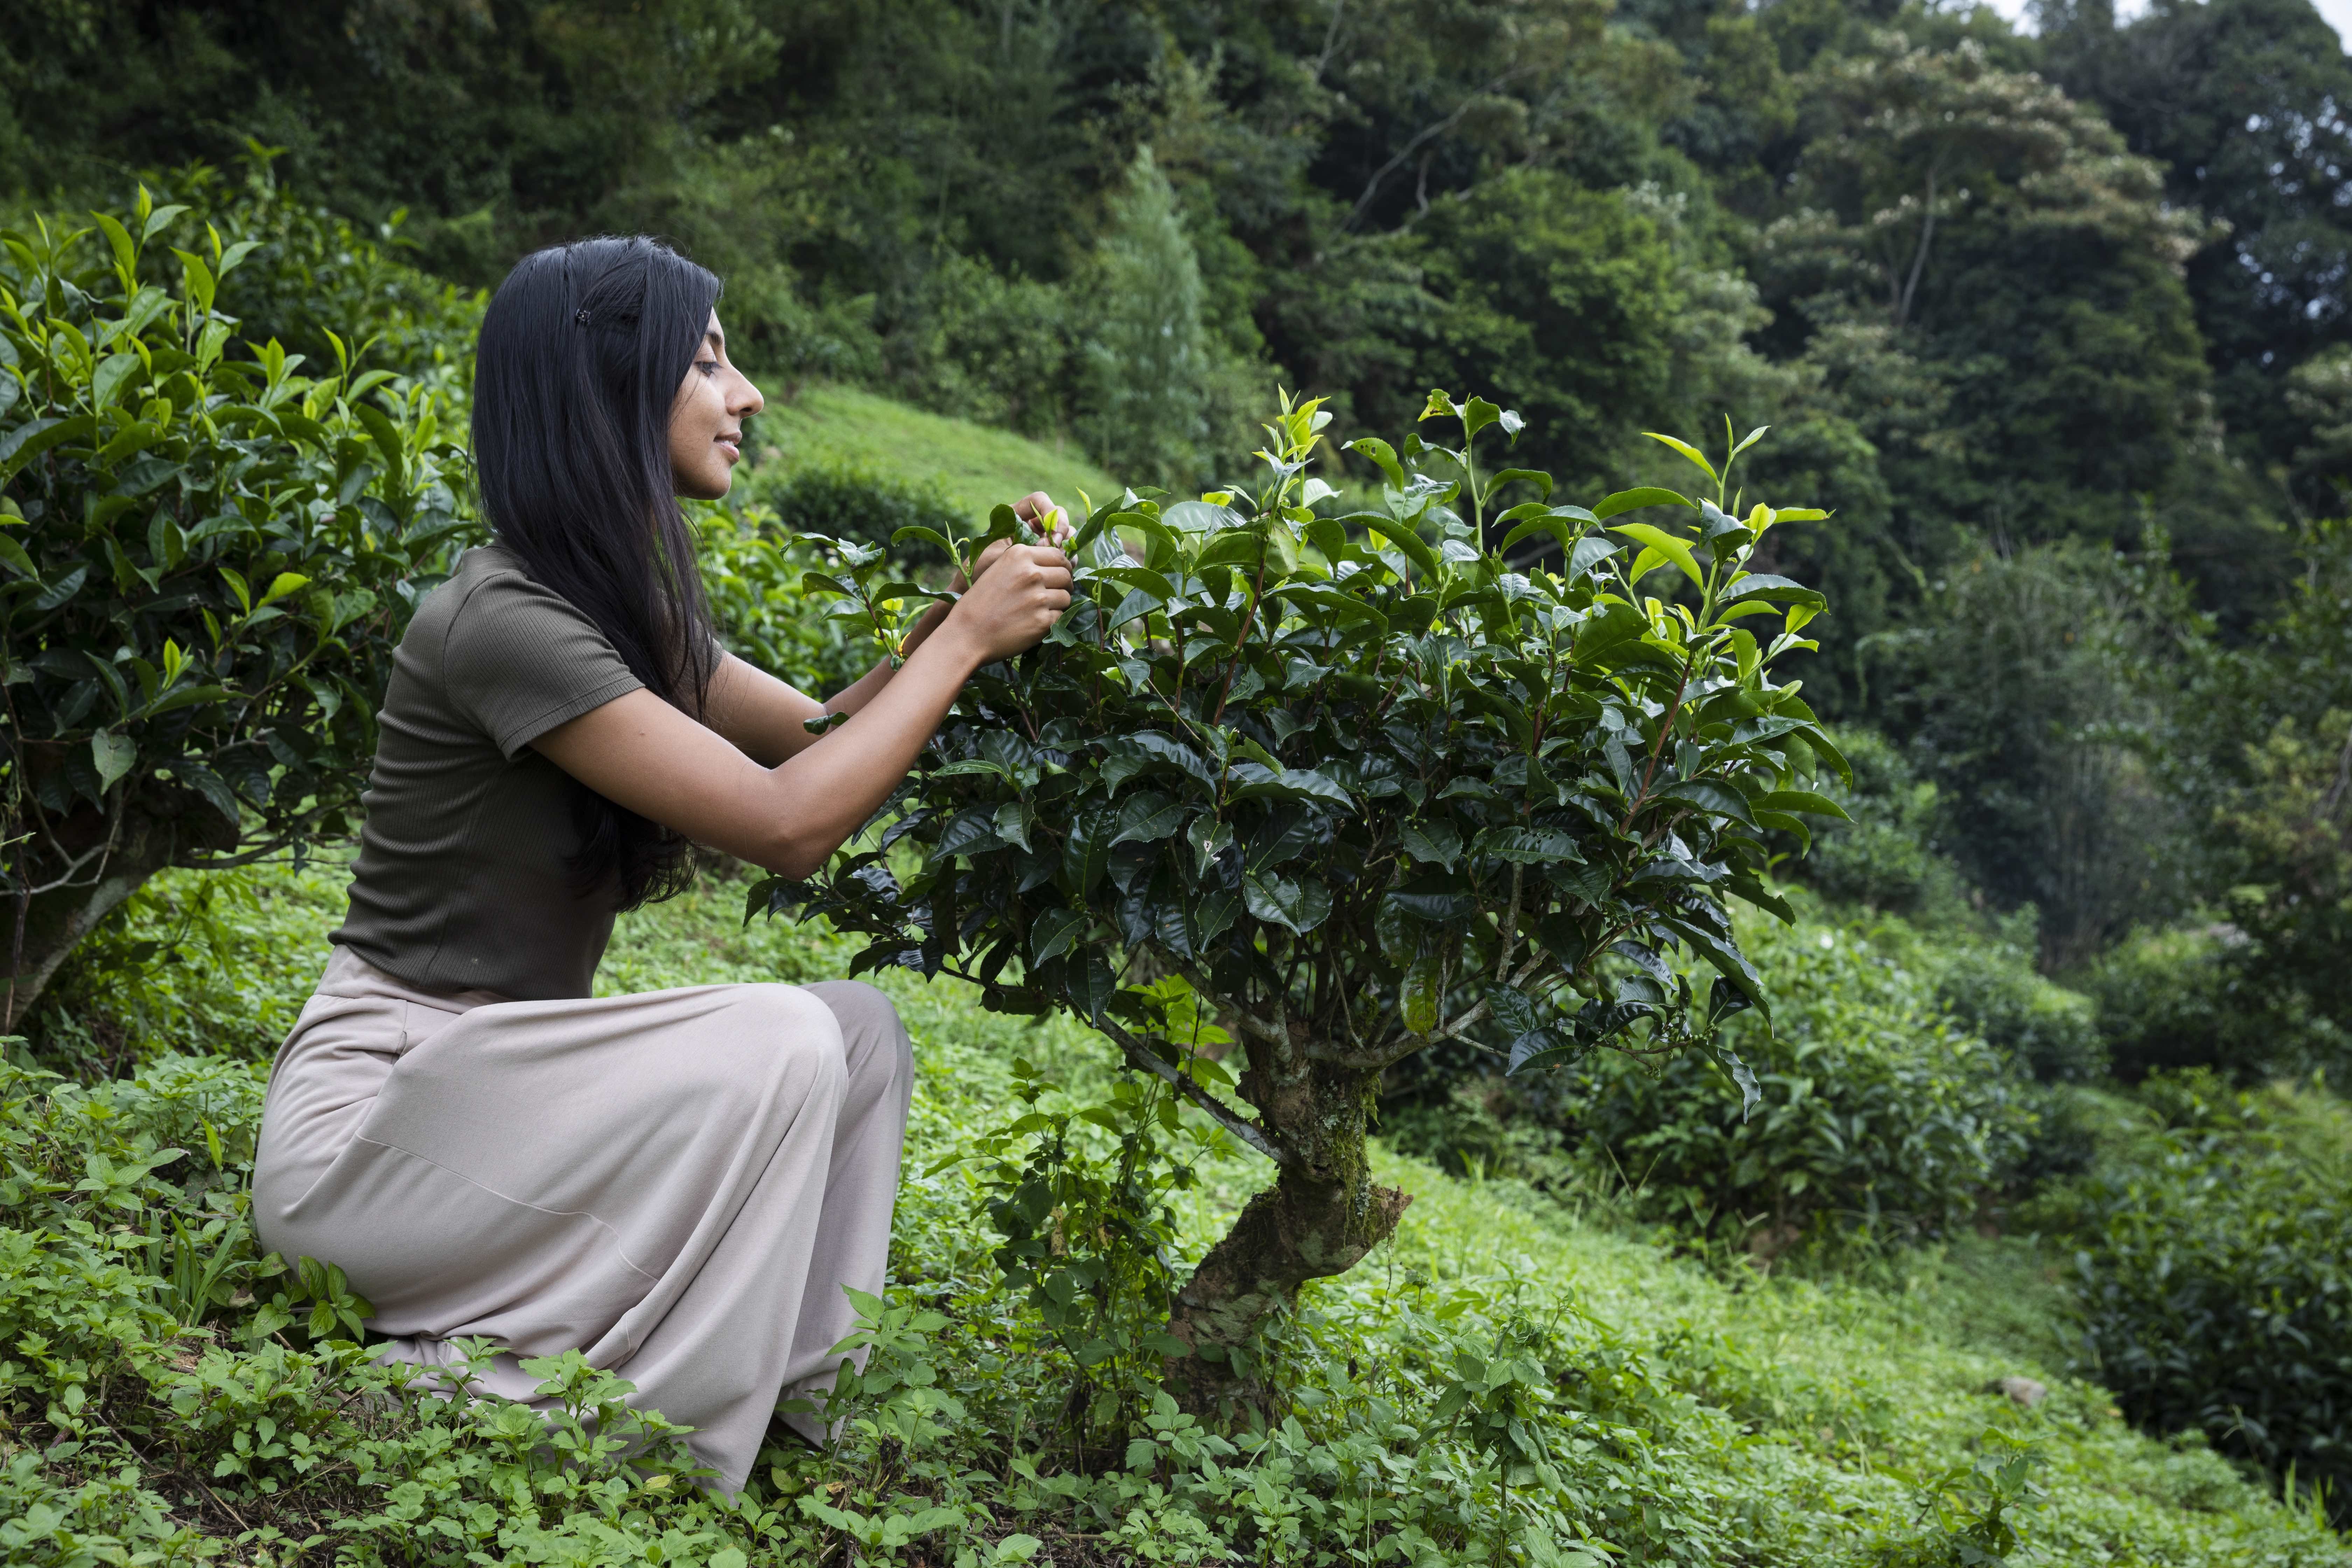 Resham Daswani visits a tea plantation, sourcing leaves for the tea meditation ceremonies she conducts in Hong Kong. Photo: Handout